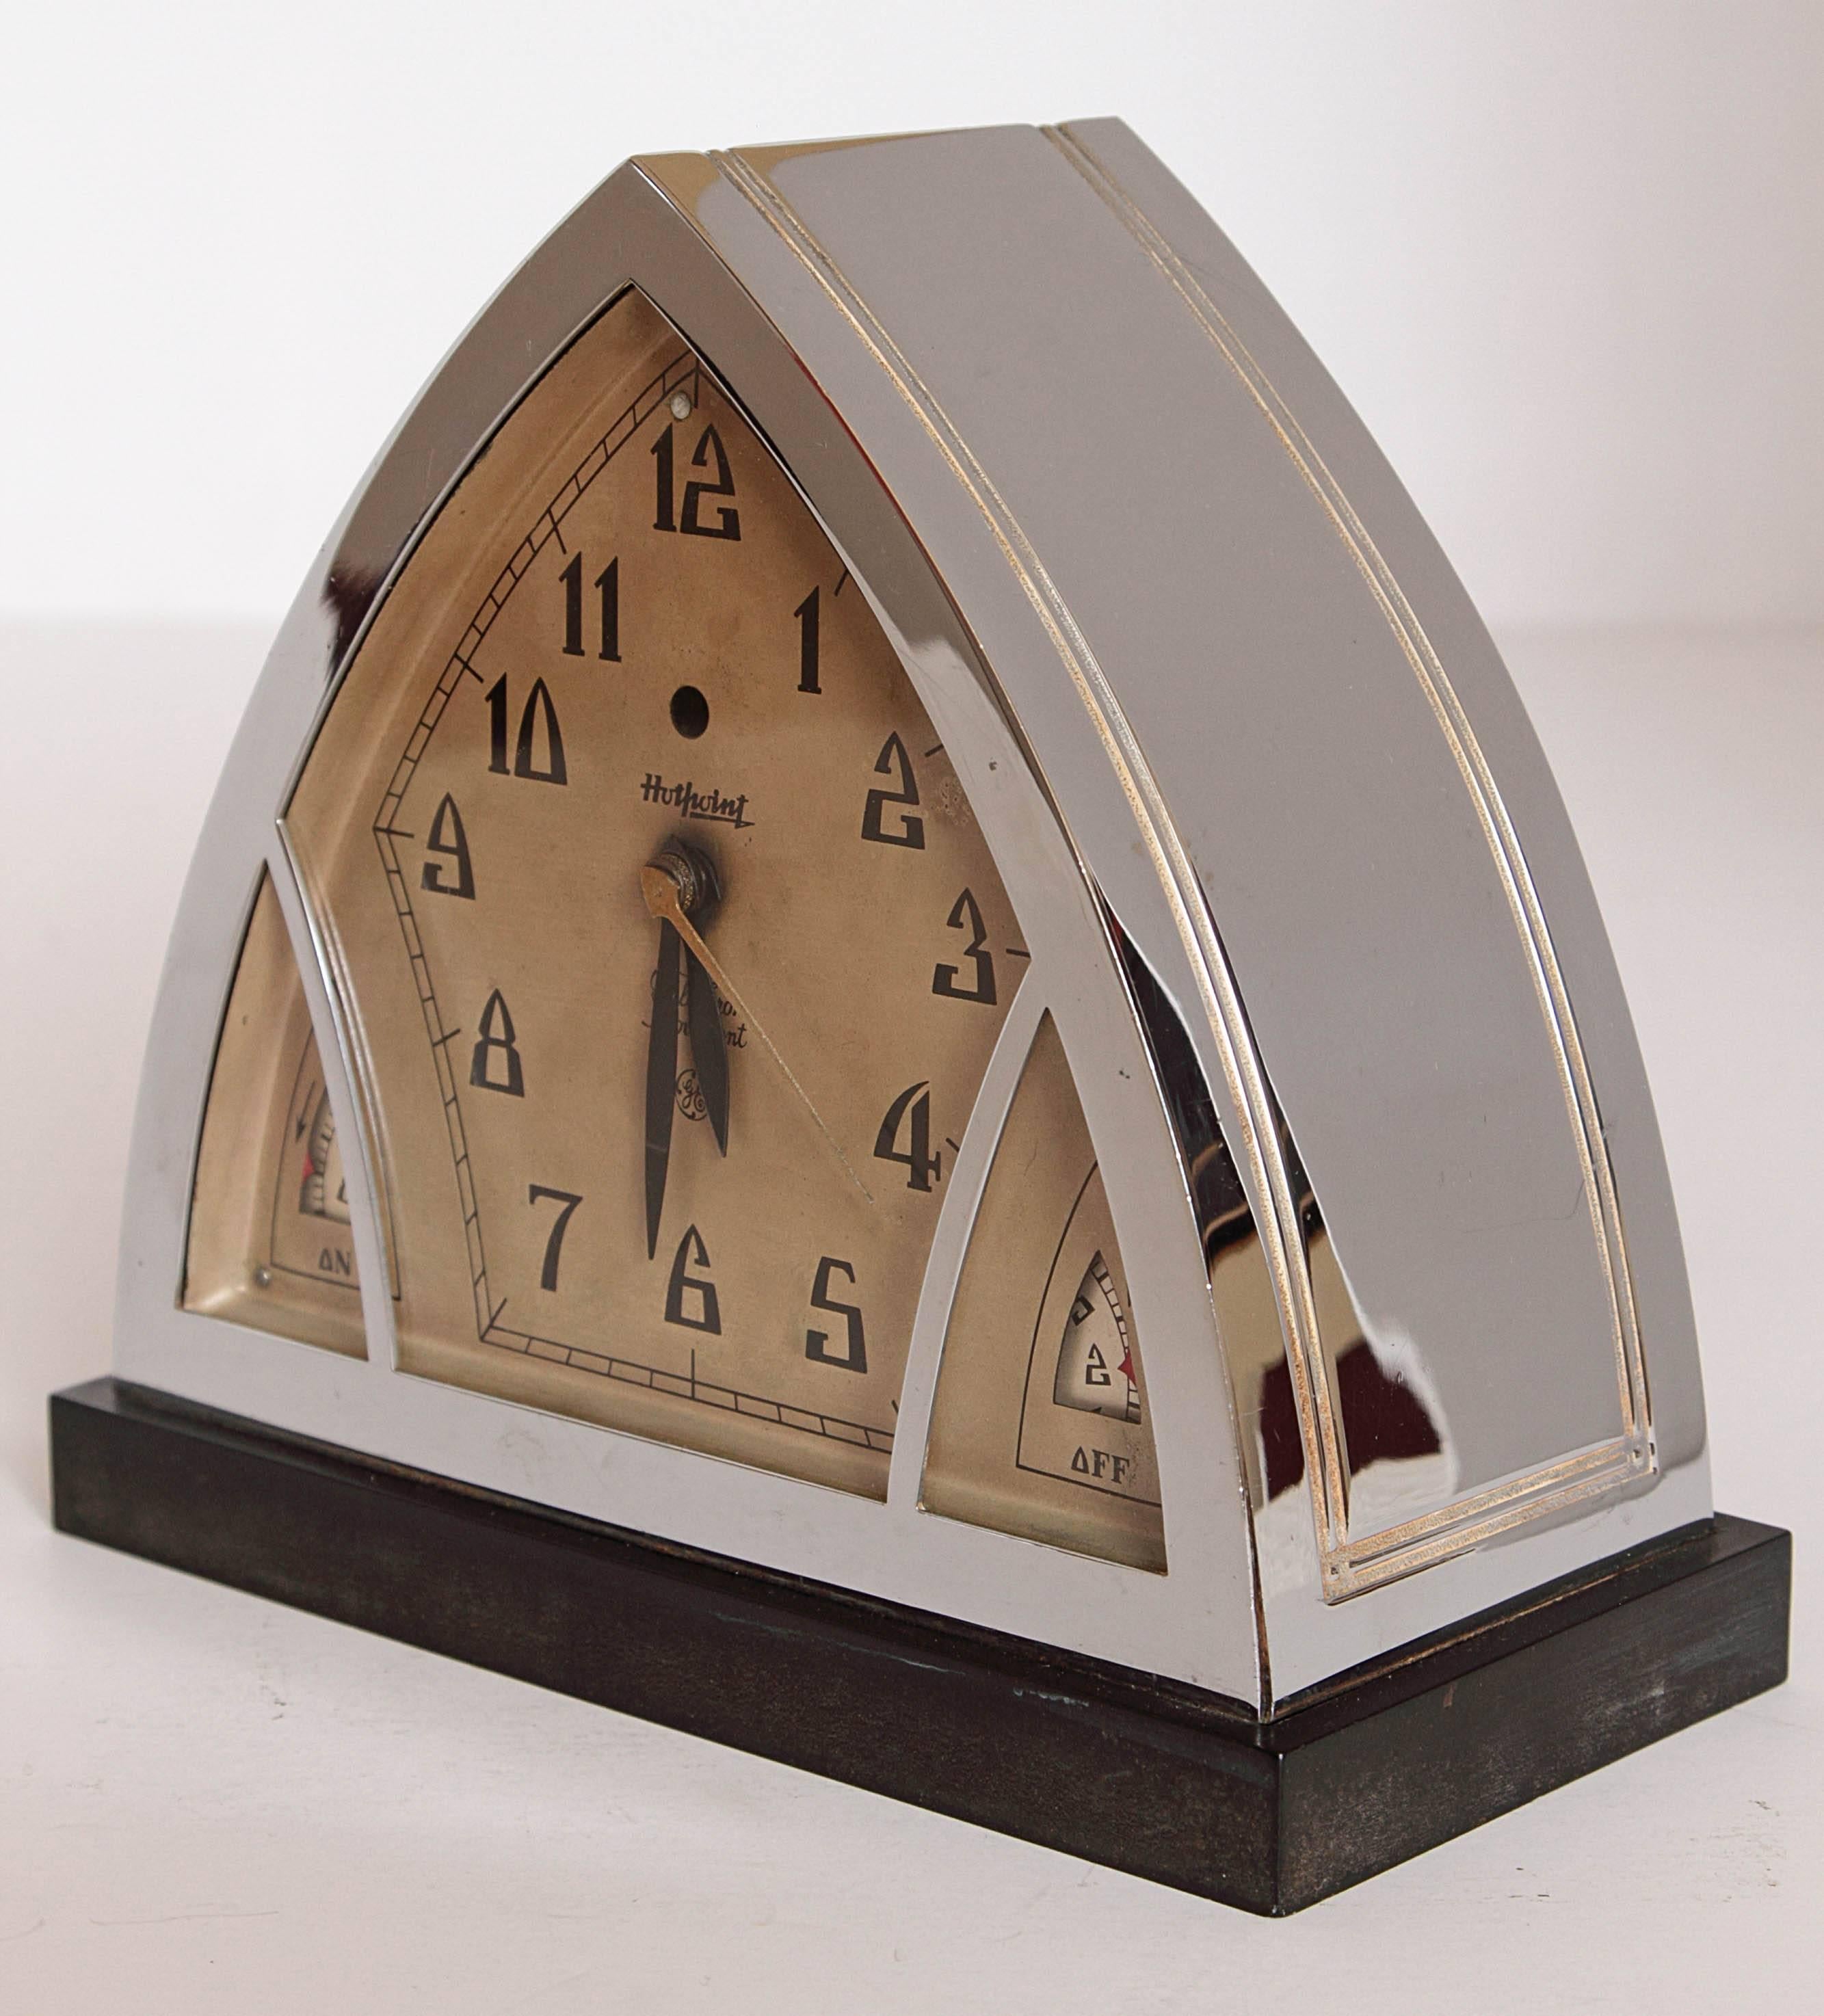 Another of the early Classic American Industrial re-designs by Patten.
Design Patent USD83642S, 1930, for the Edison General Electric Appliance Company,
large Cathedral-shaped chrome and Bakelite range - slave timer/clock, with stylized